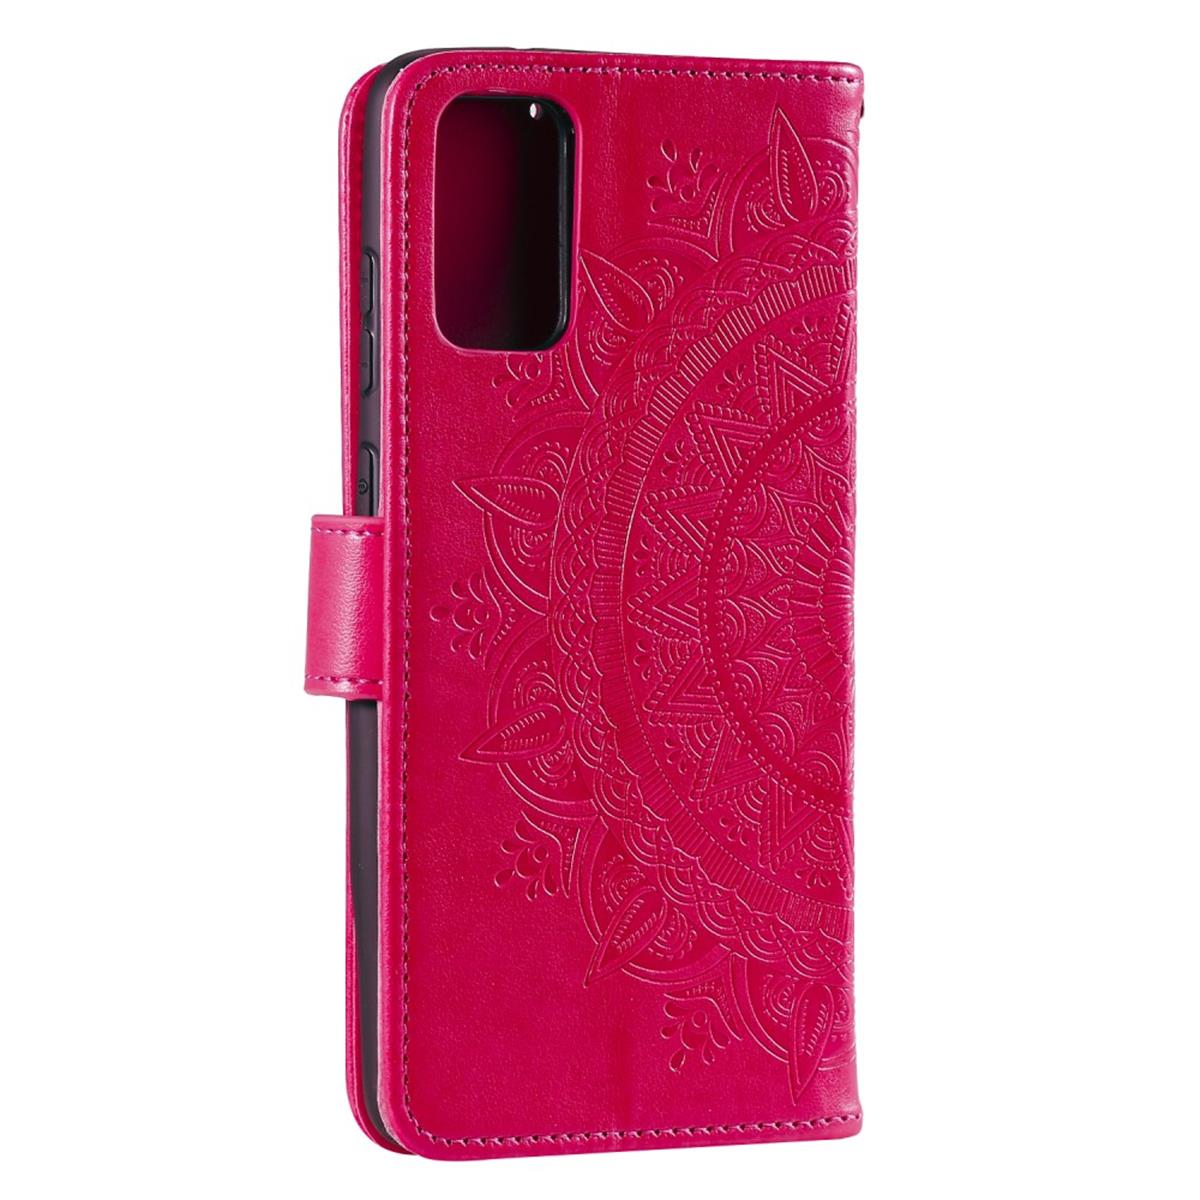 COVERKINGZ P Muster, Huawei, 2021, Bookcover, Smart Klapphülle Mandala mit Pink